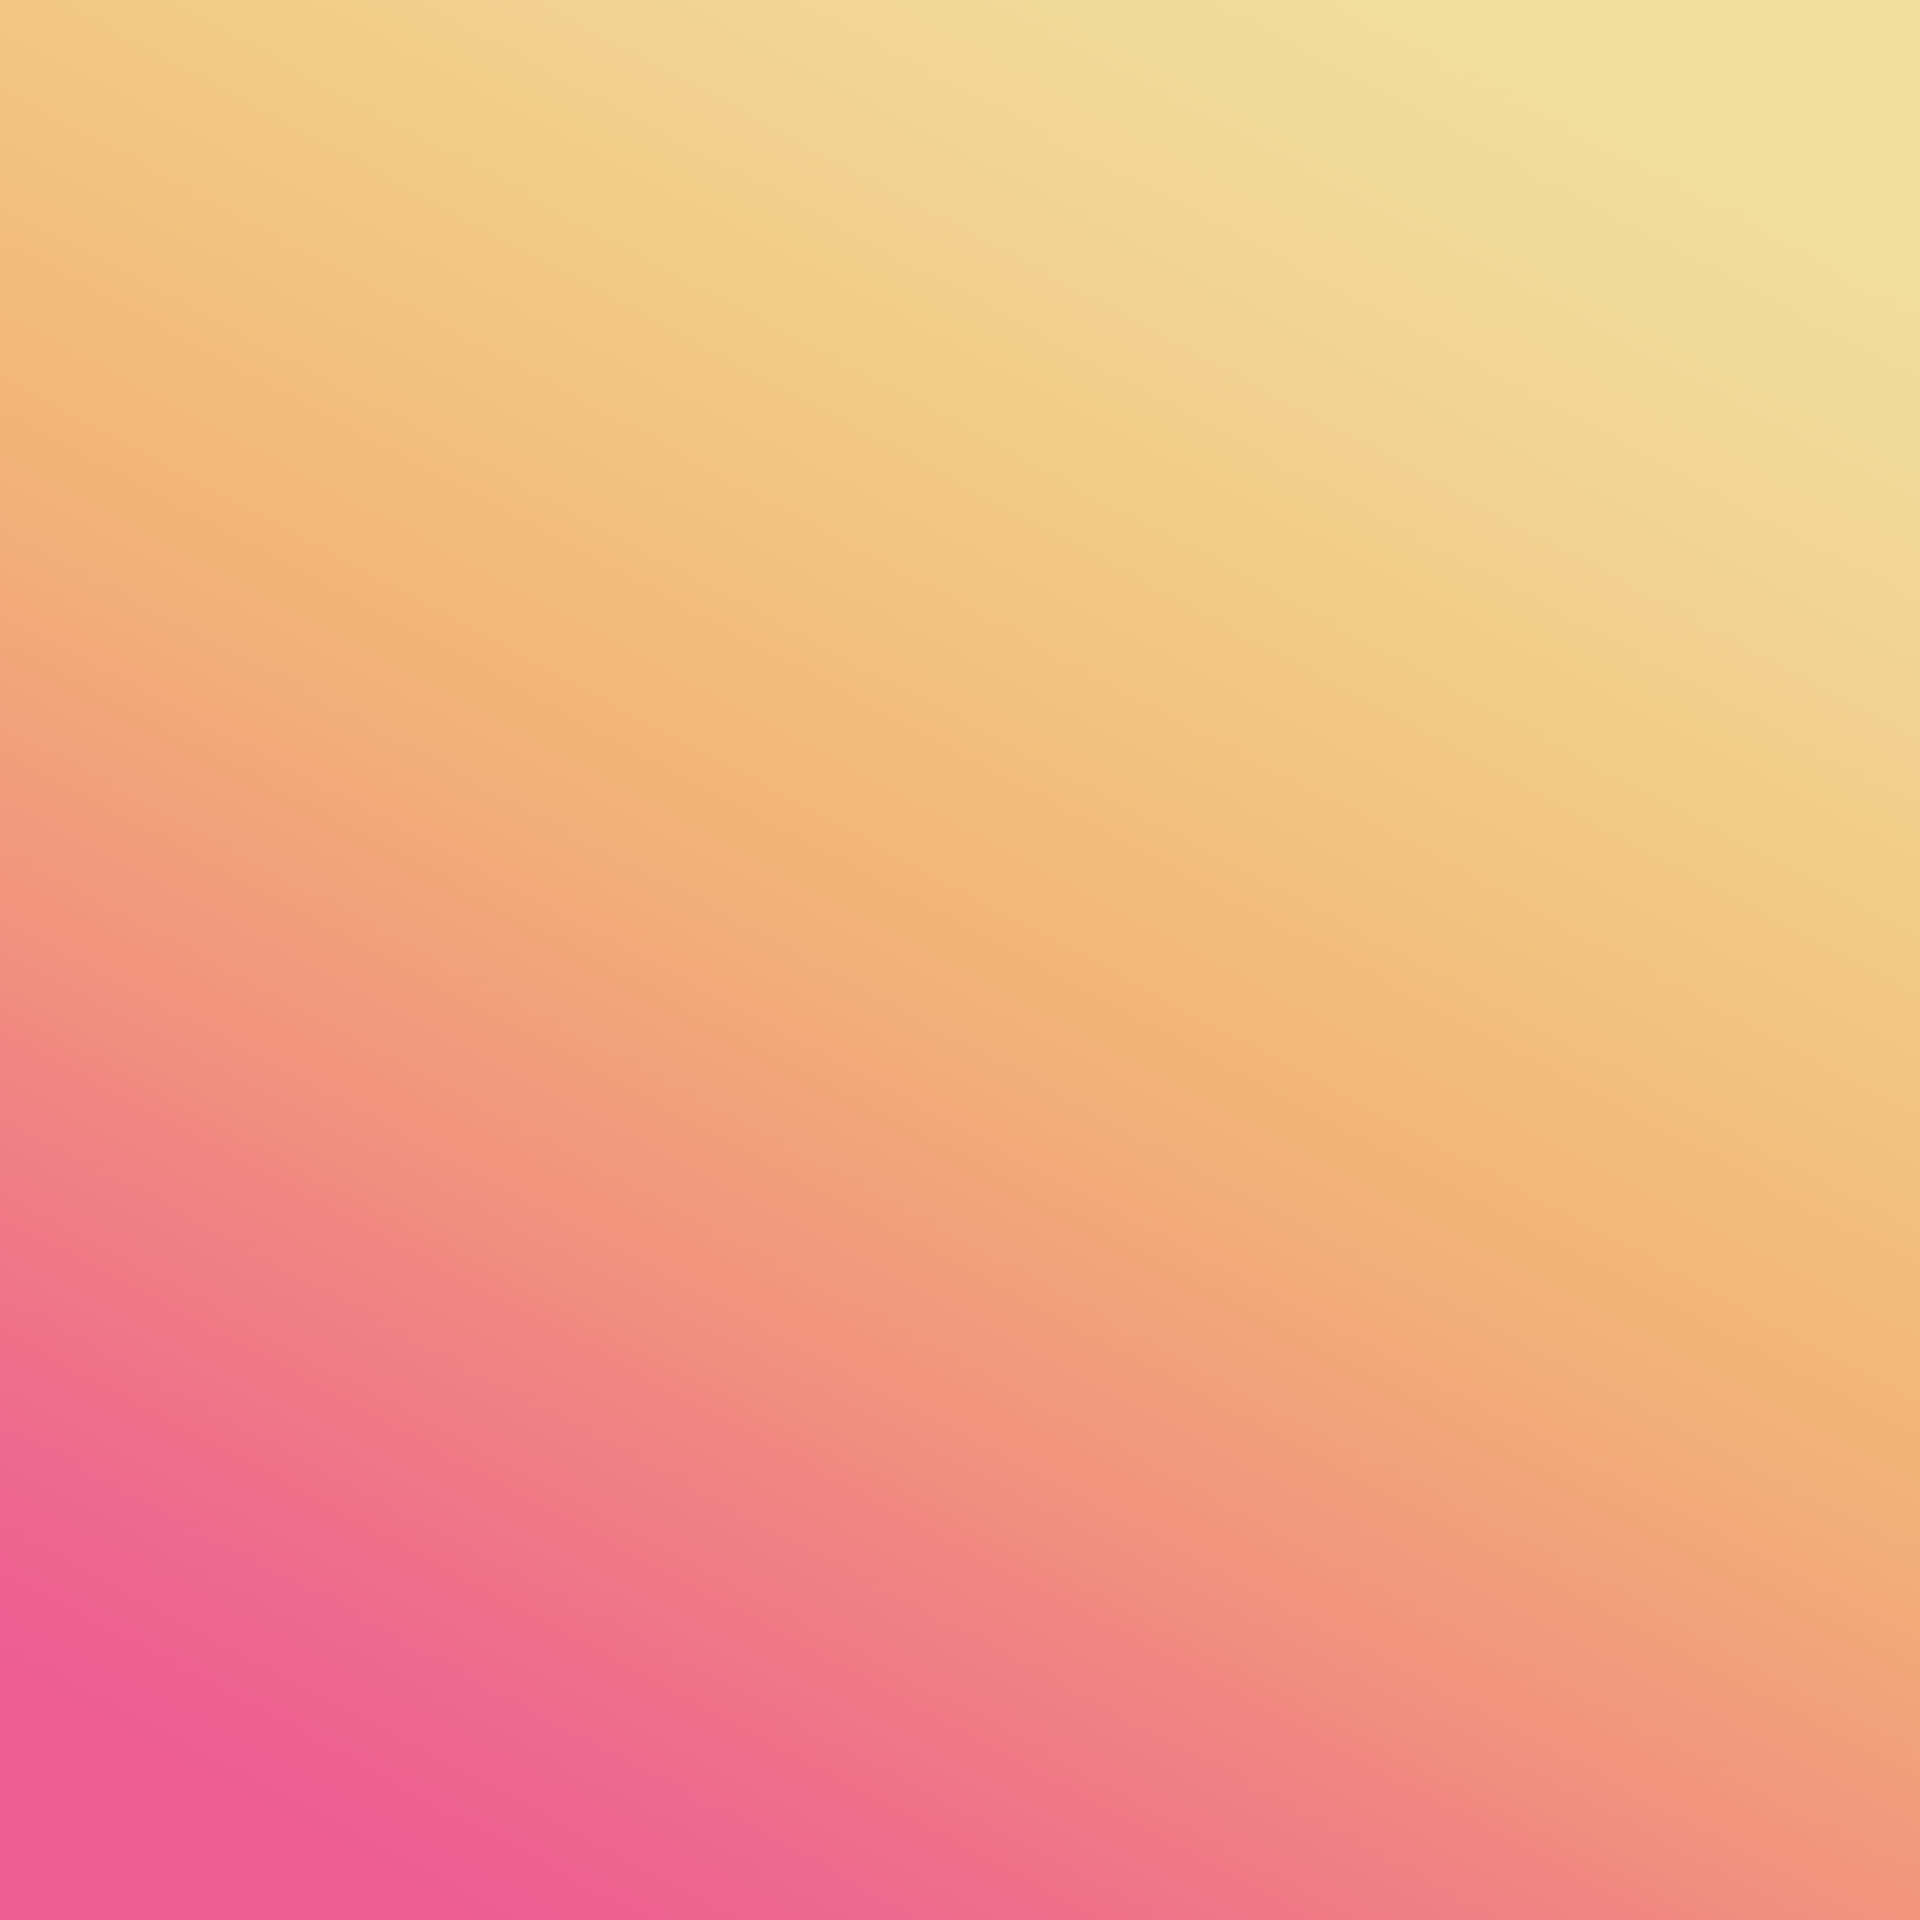 A Pink And Yellow Gradient Wallpaper